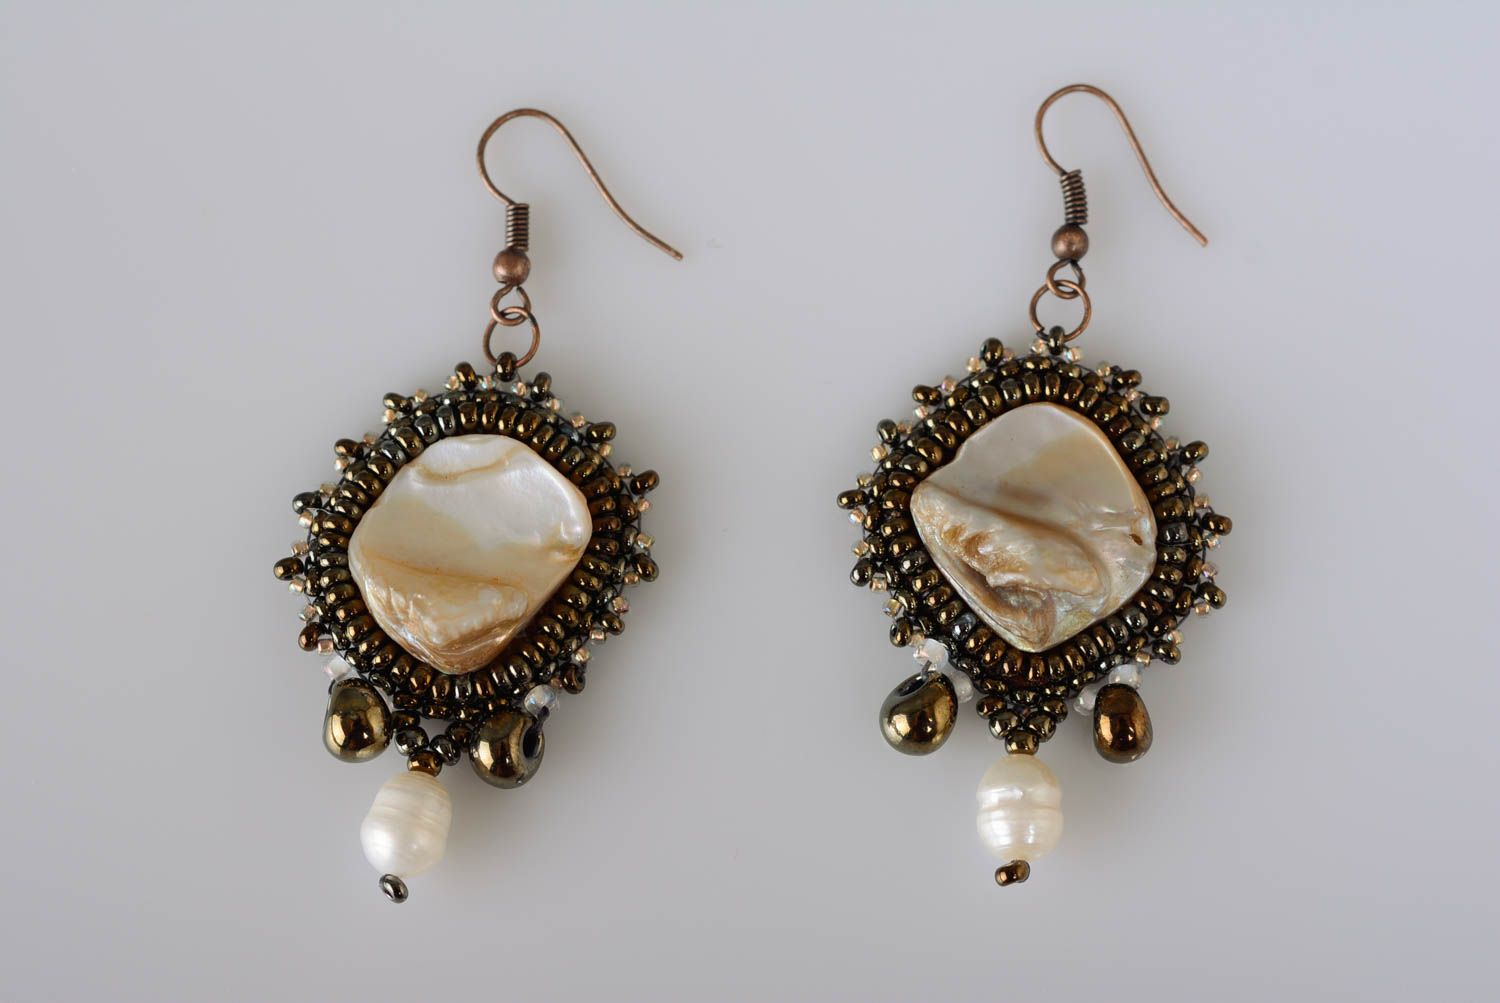 Handmade stylish beaded earrings with natural stones fancy evening accessory photo 1